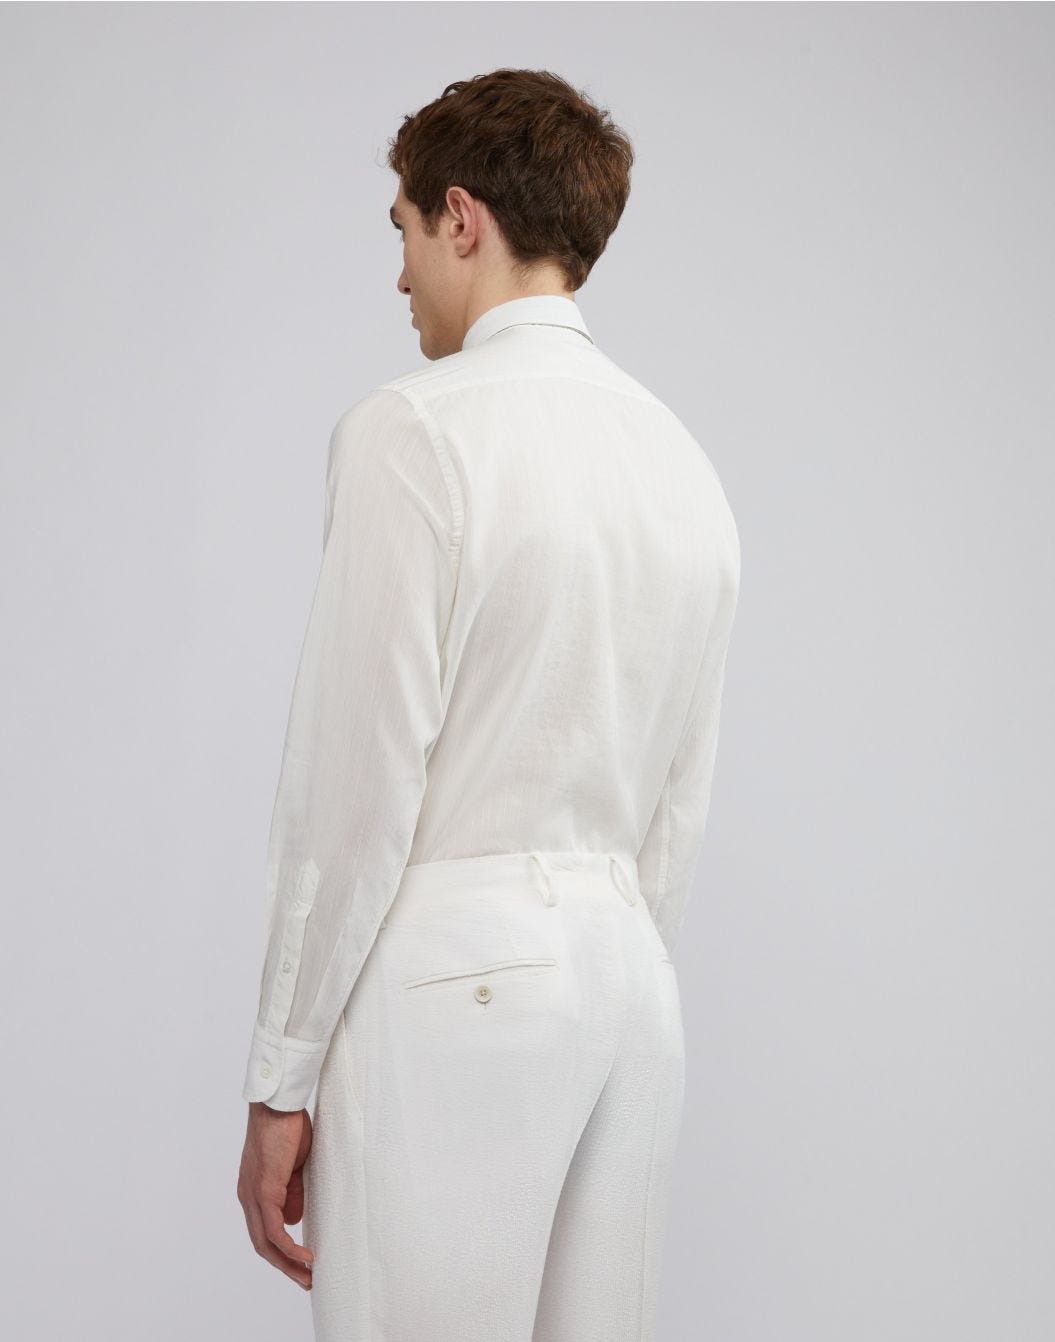 White voile shirt with an Italian collar